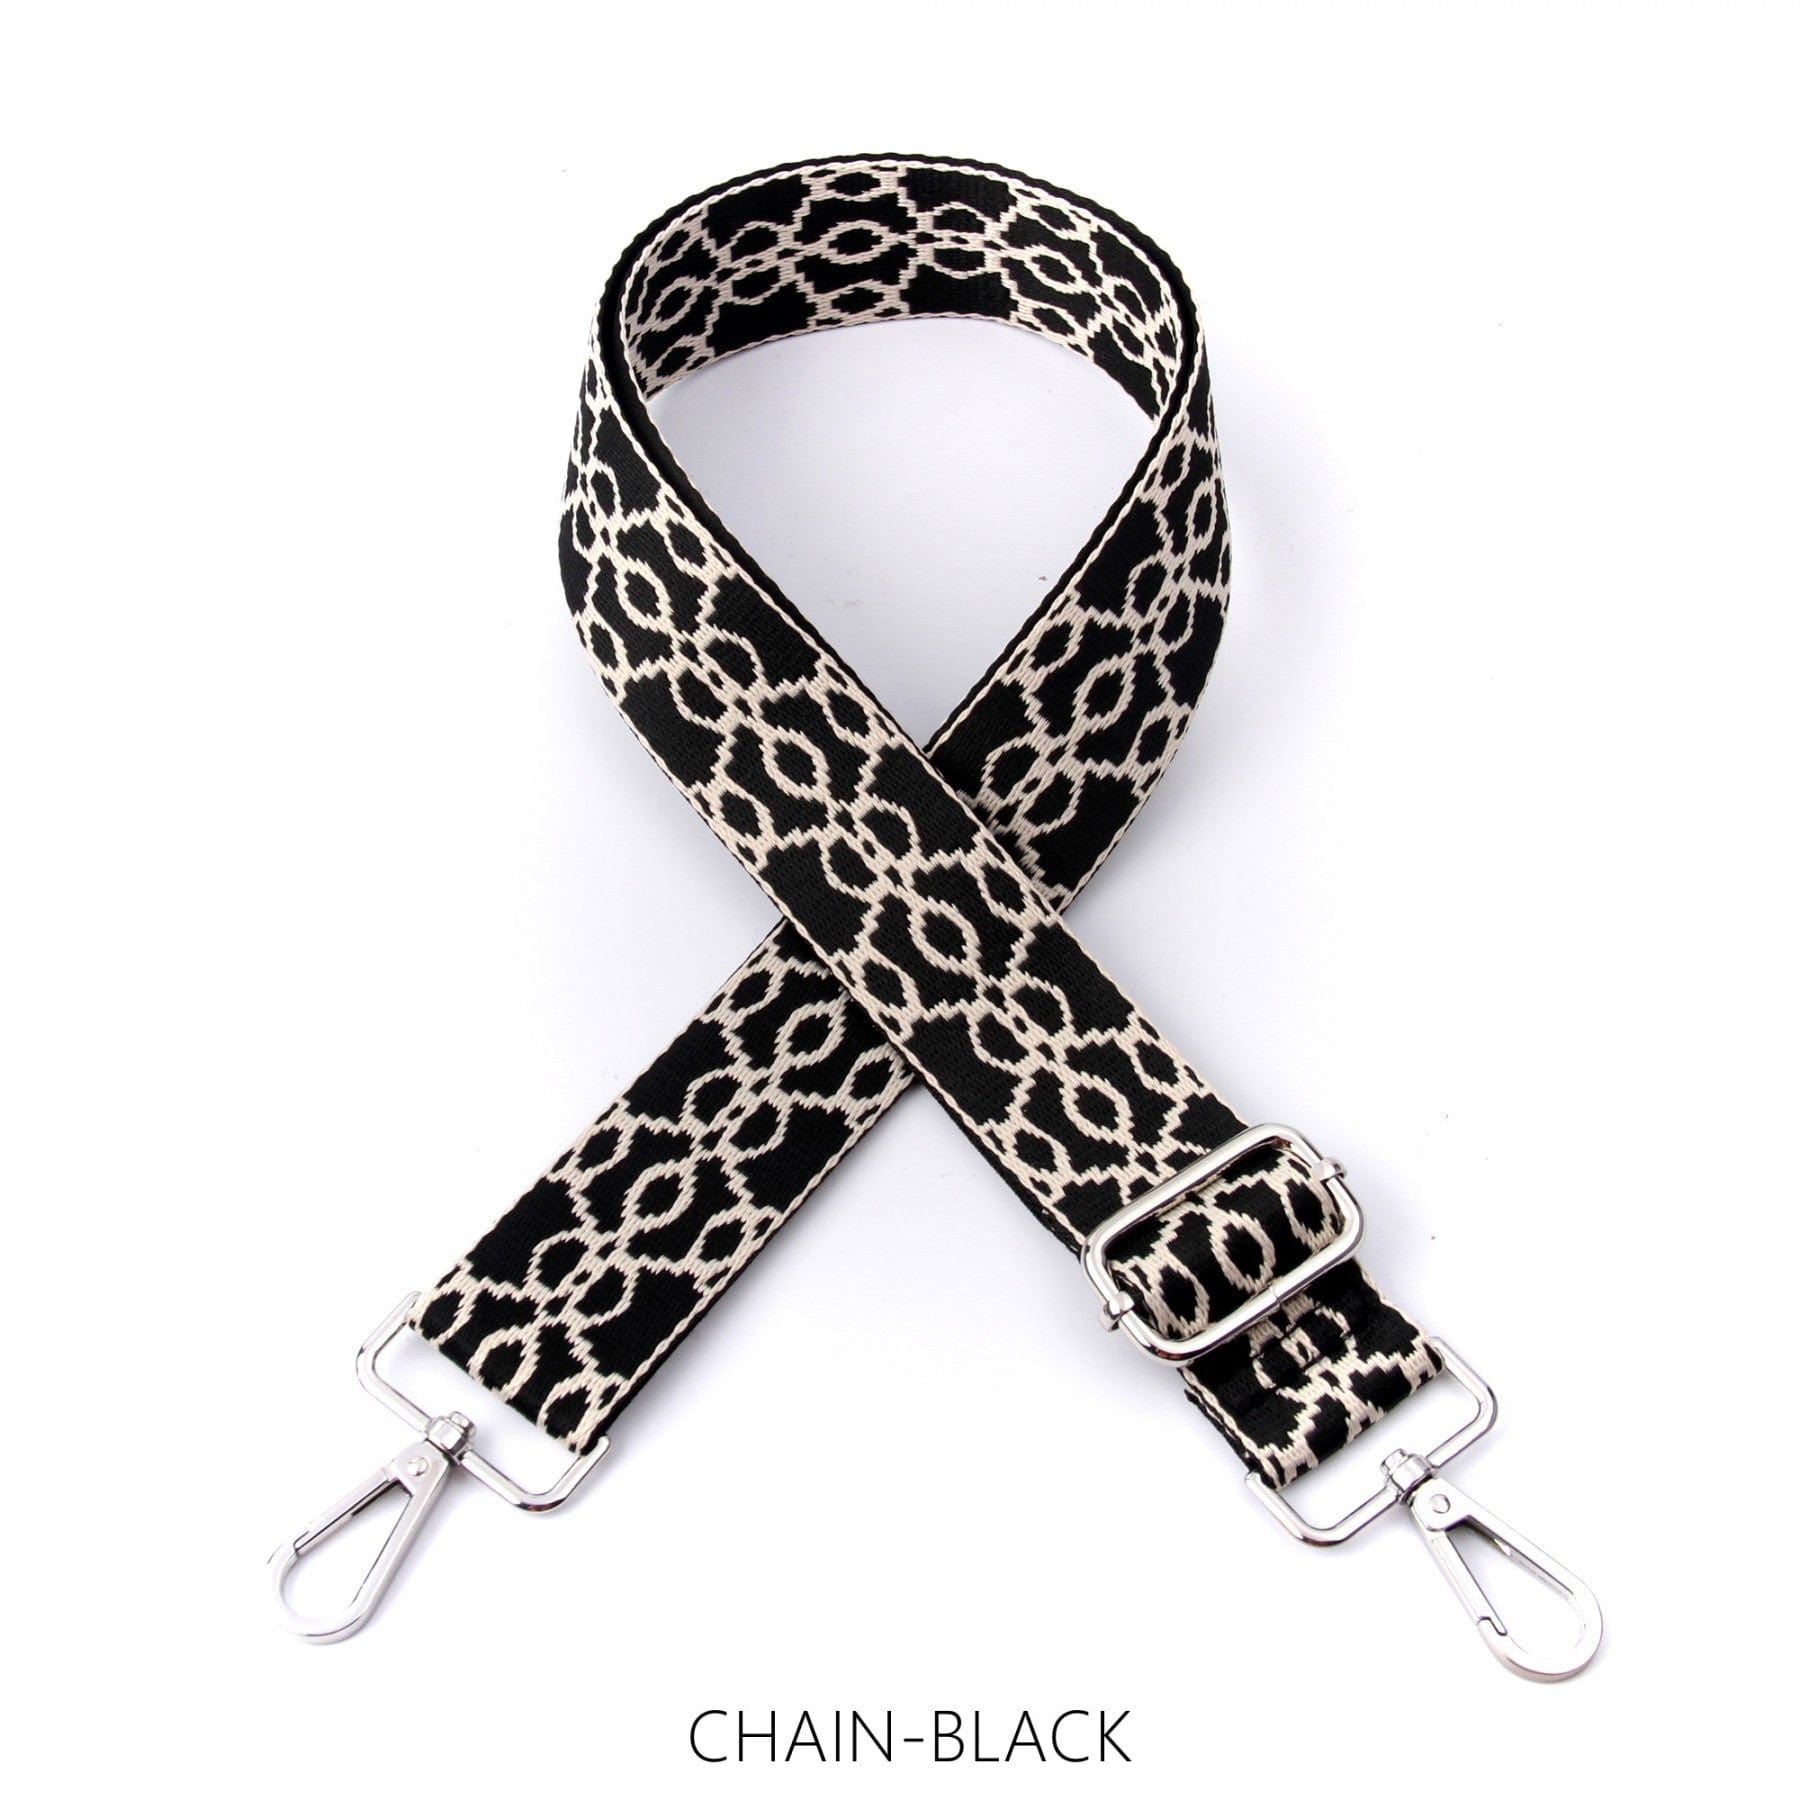 lusciousscarves Apparel & Accessories Chain-Black Slim Interchangeable Handbag Straps with Silver Hardware